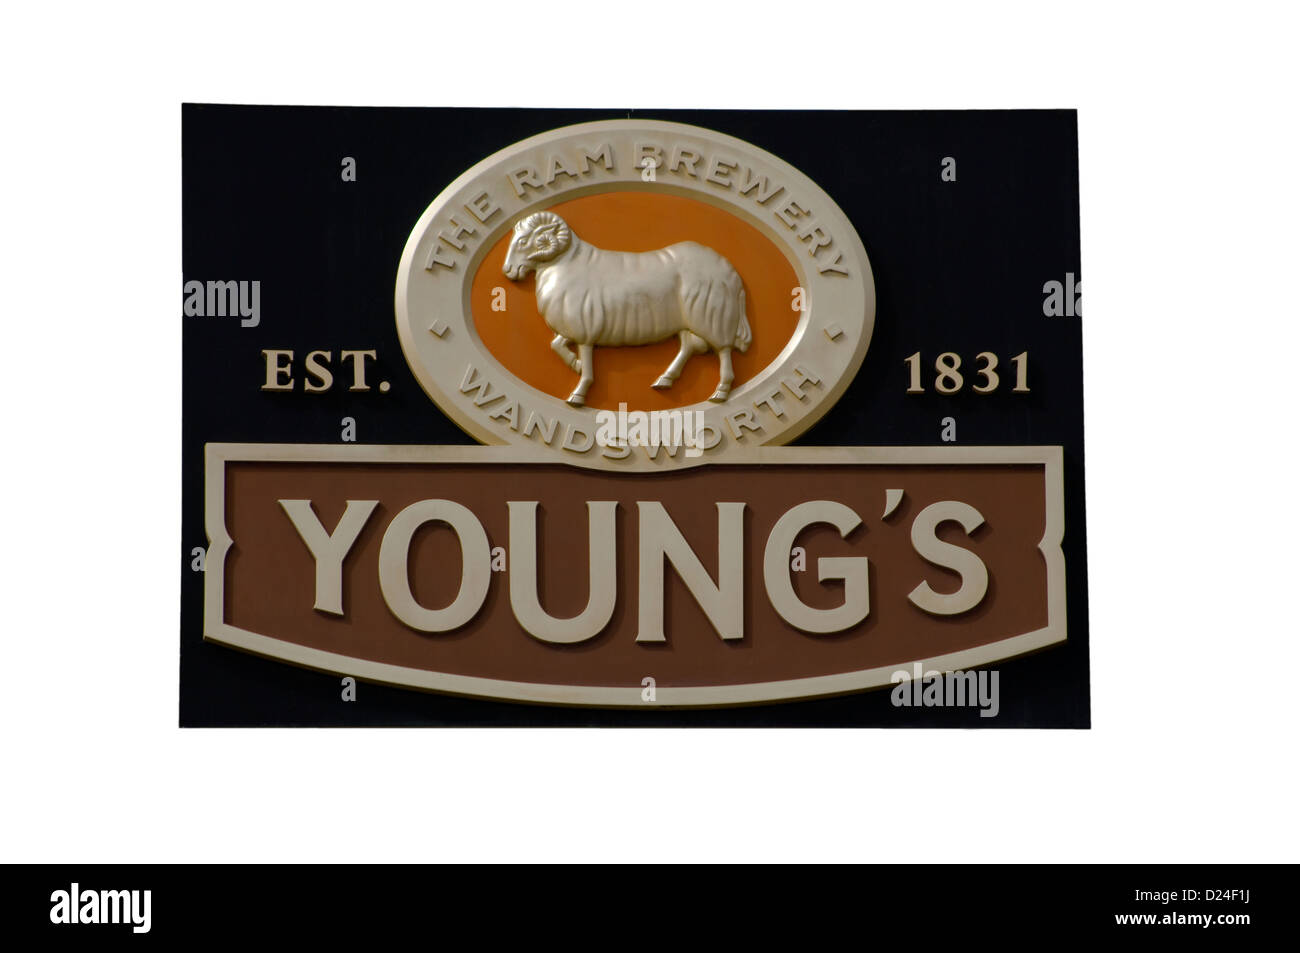 Youngs Brewery segno Foto Stock